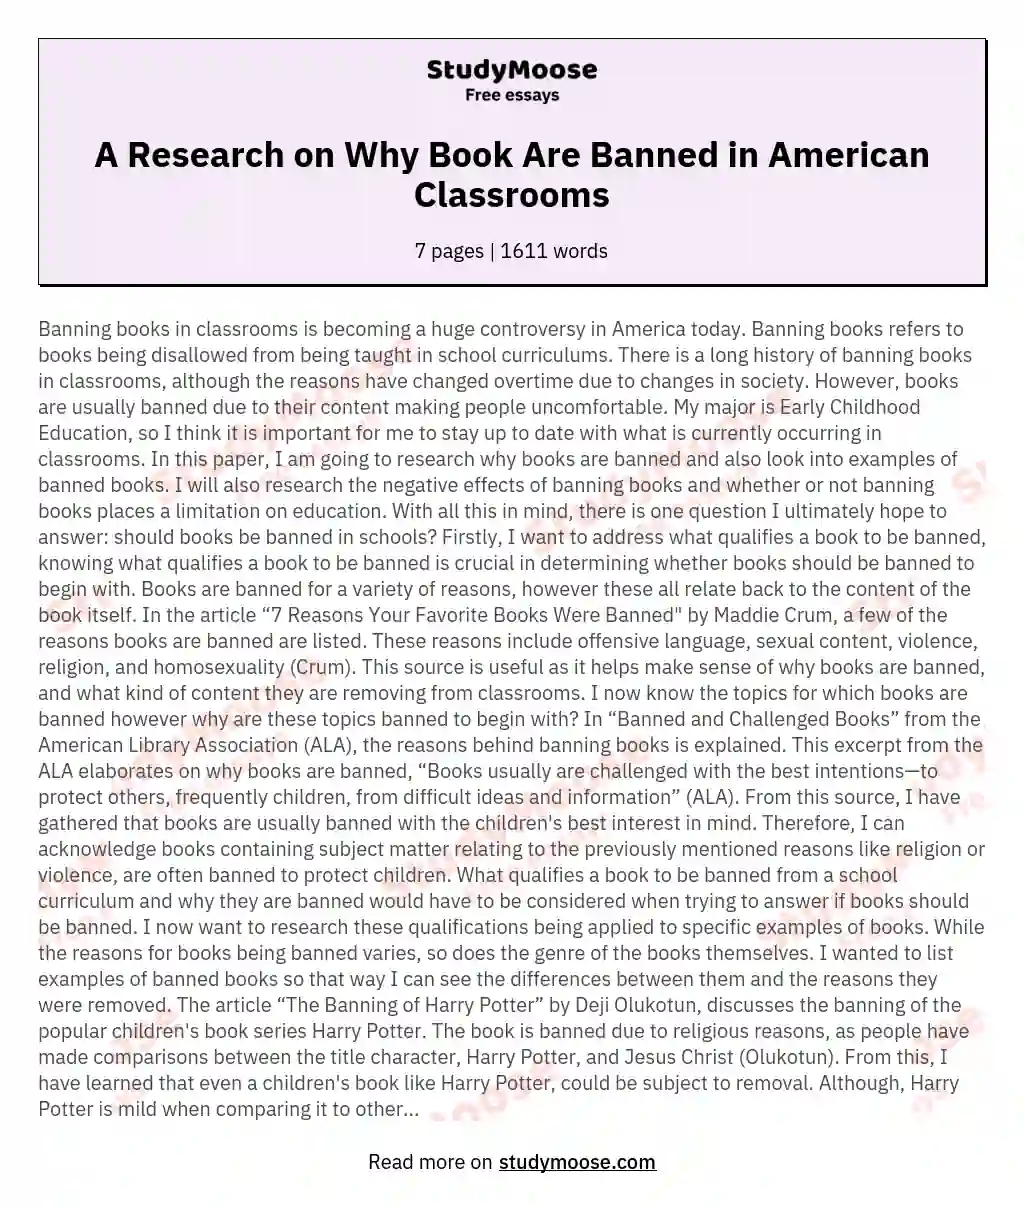 A Research on Why Book Are Banned in American Classrooms essay